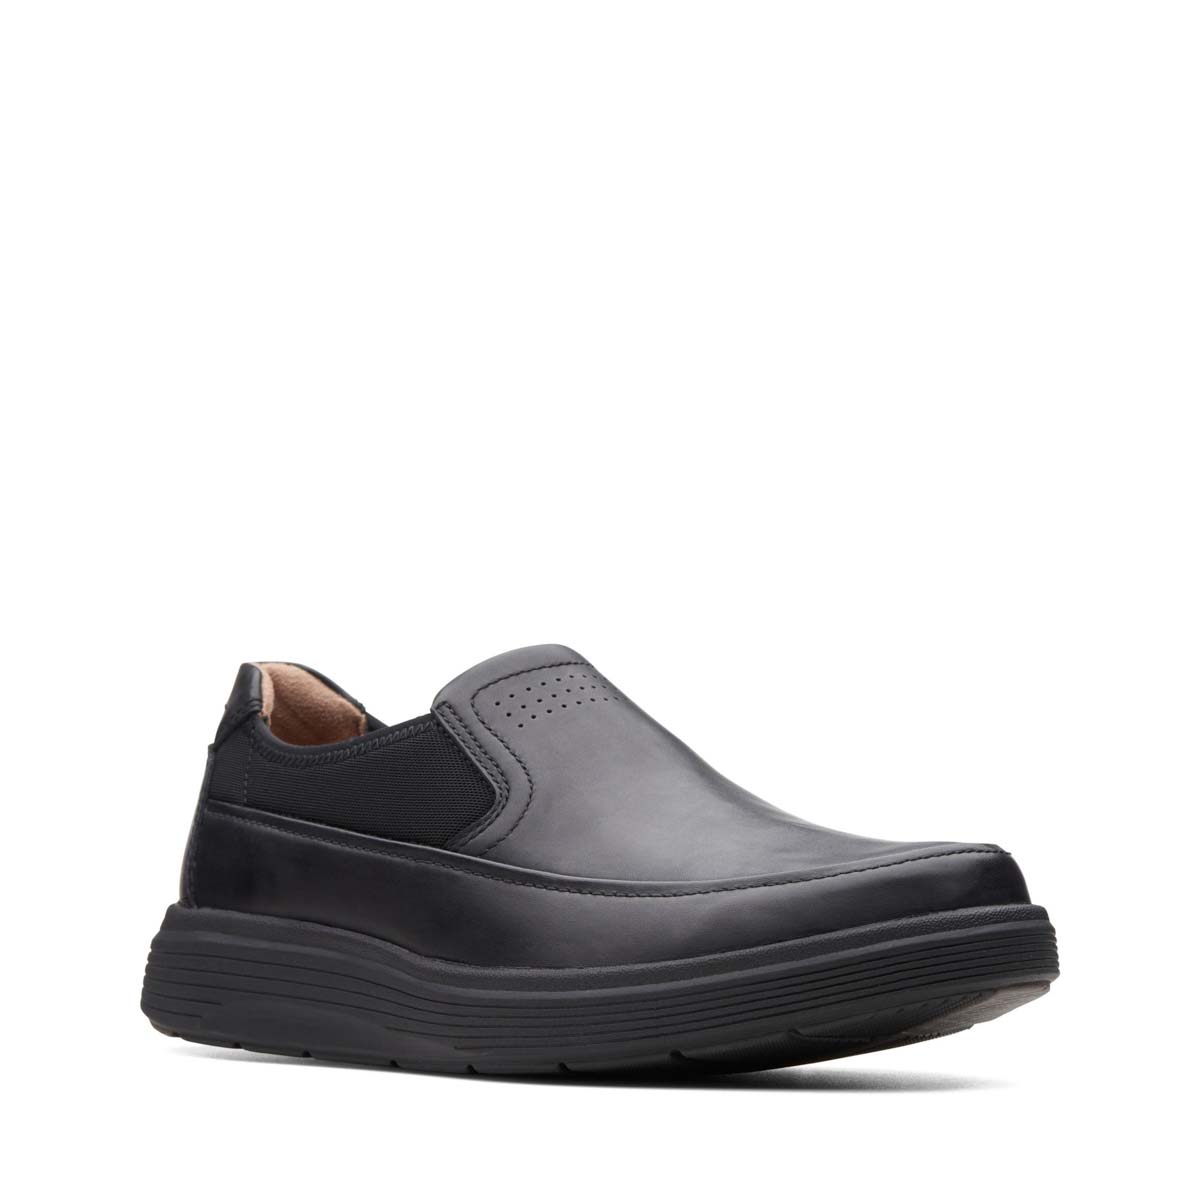 Clarks Un Abode Go Black Leather Mens Slip-On Shoes 370767G In Size 11 In Plain Black Leather G Width Fitting